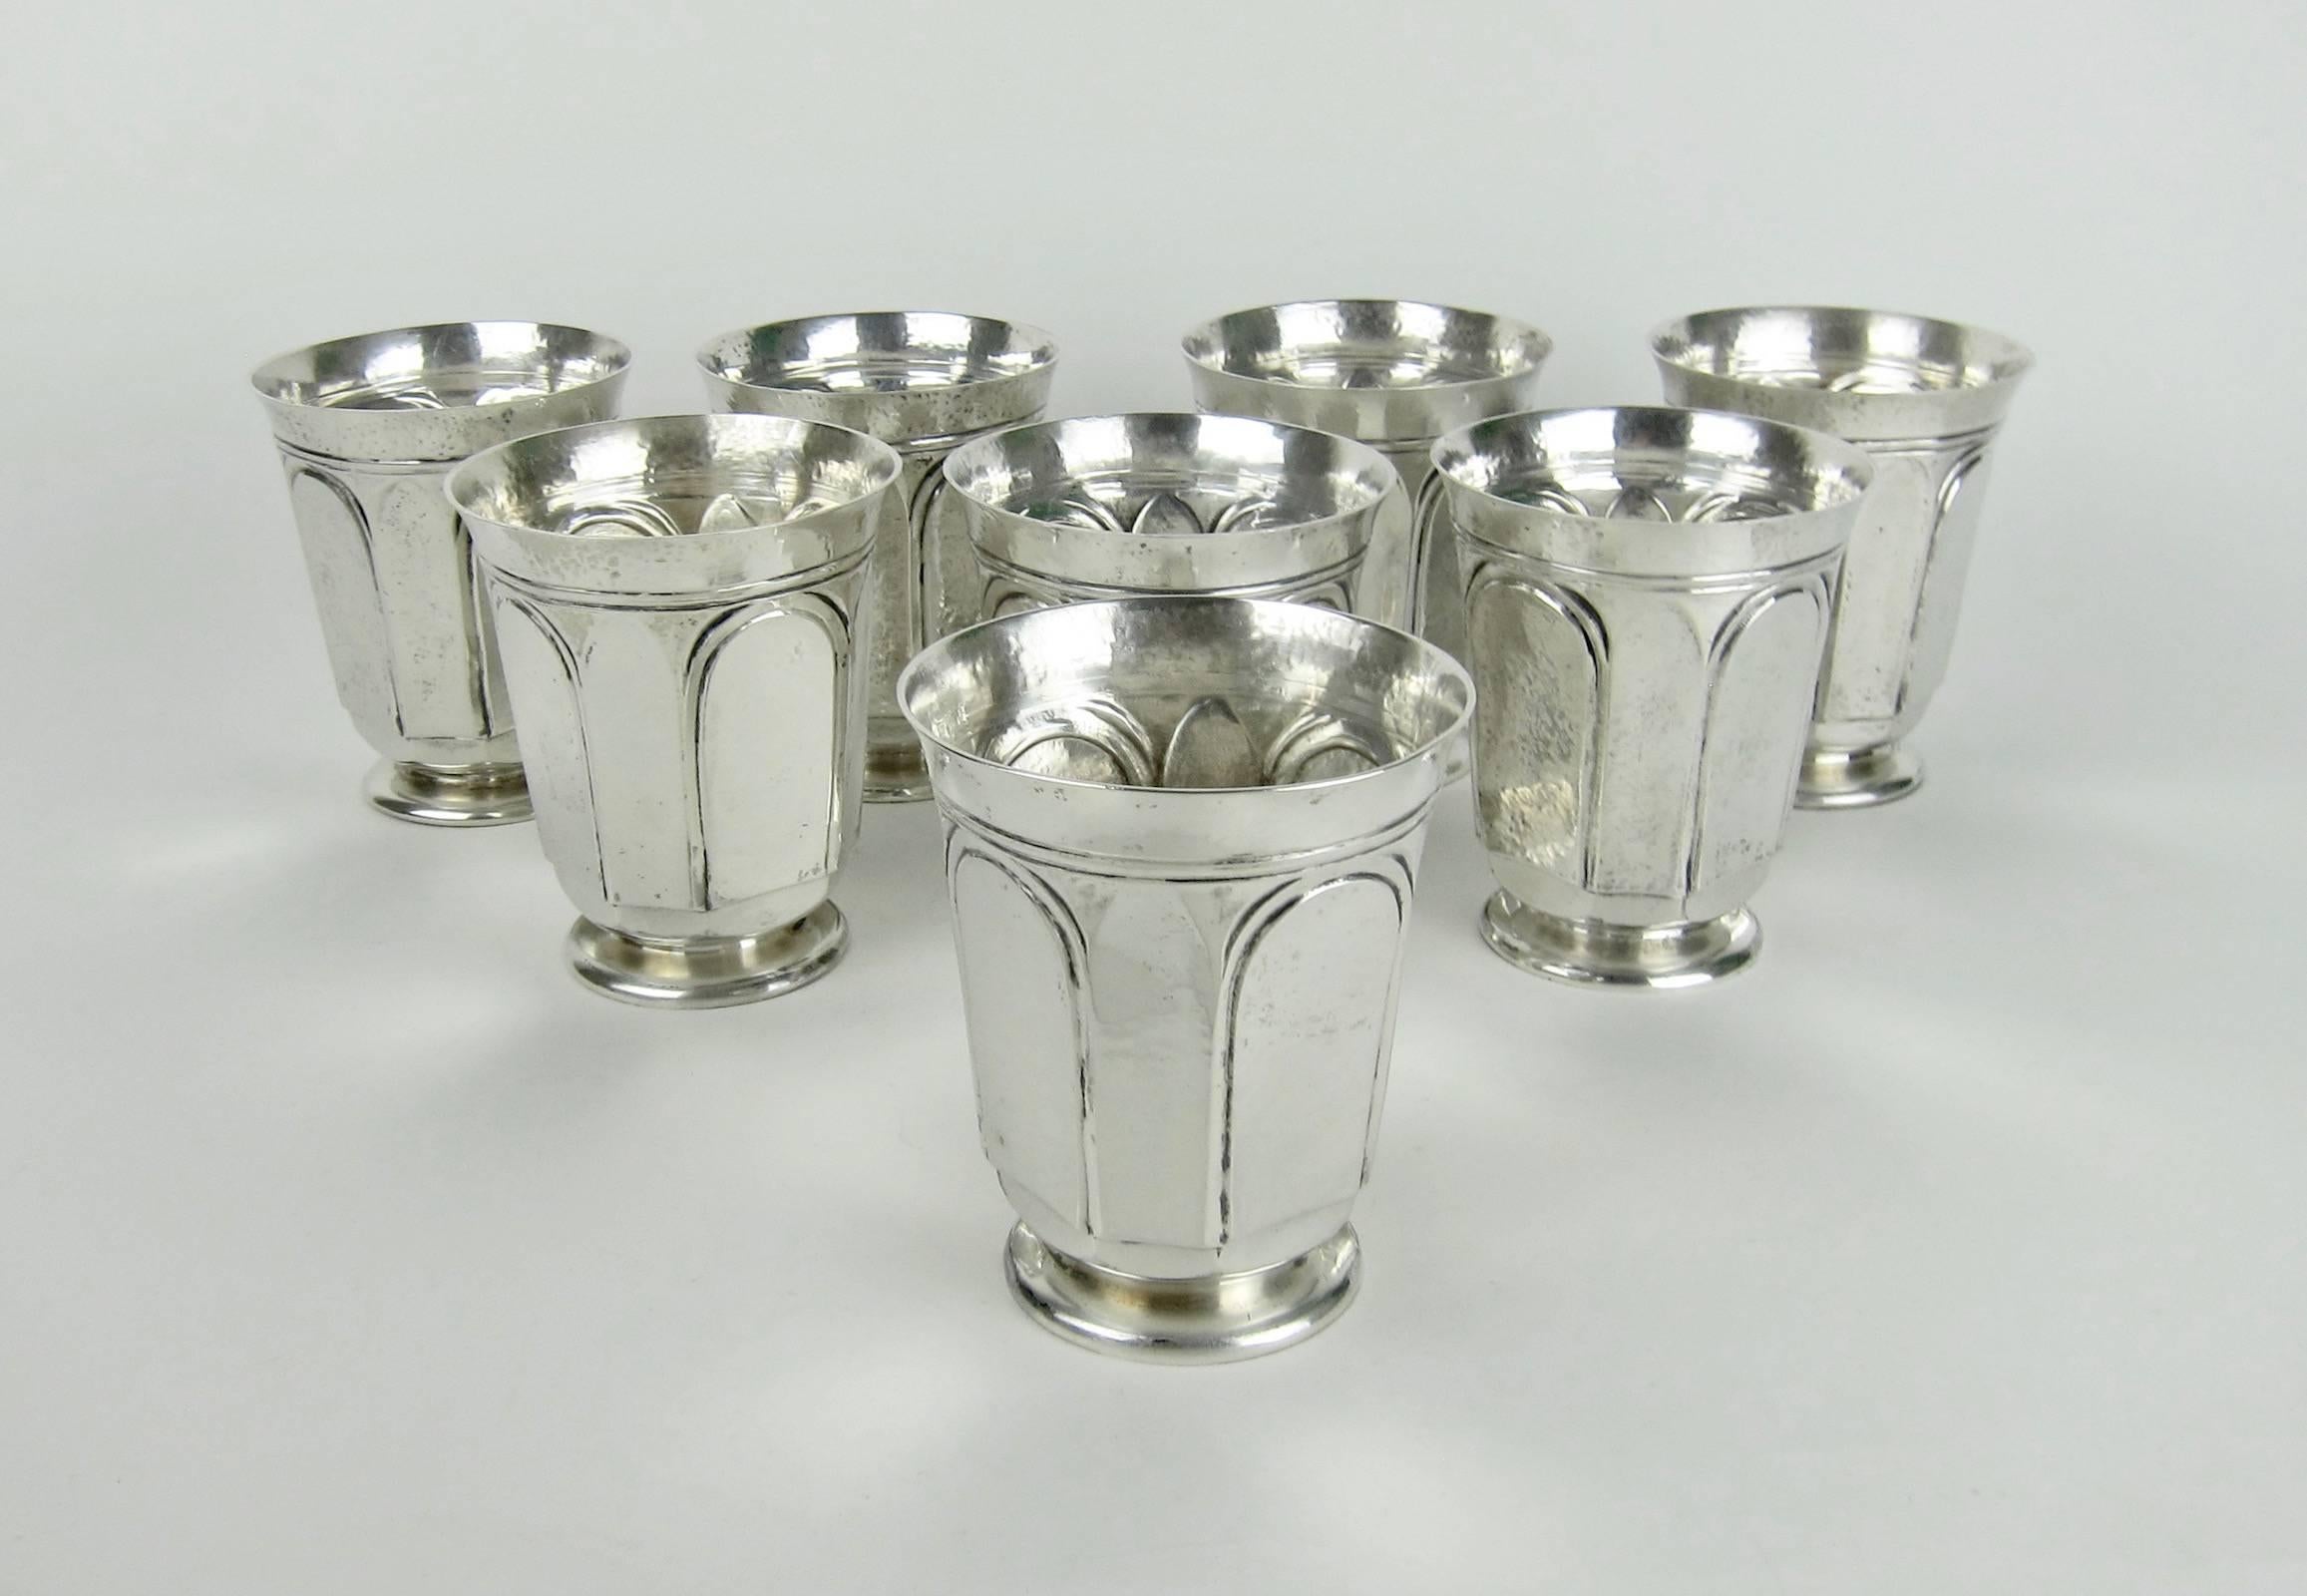 Heavy Sterling Silver Tumblers or Julep Cups by Marie Zimmermann, circa 1915 In Good Condition For Sale In Los Angeles, CA